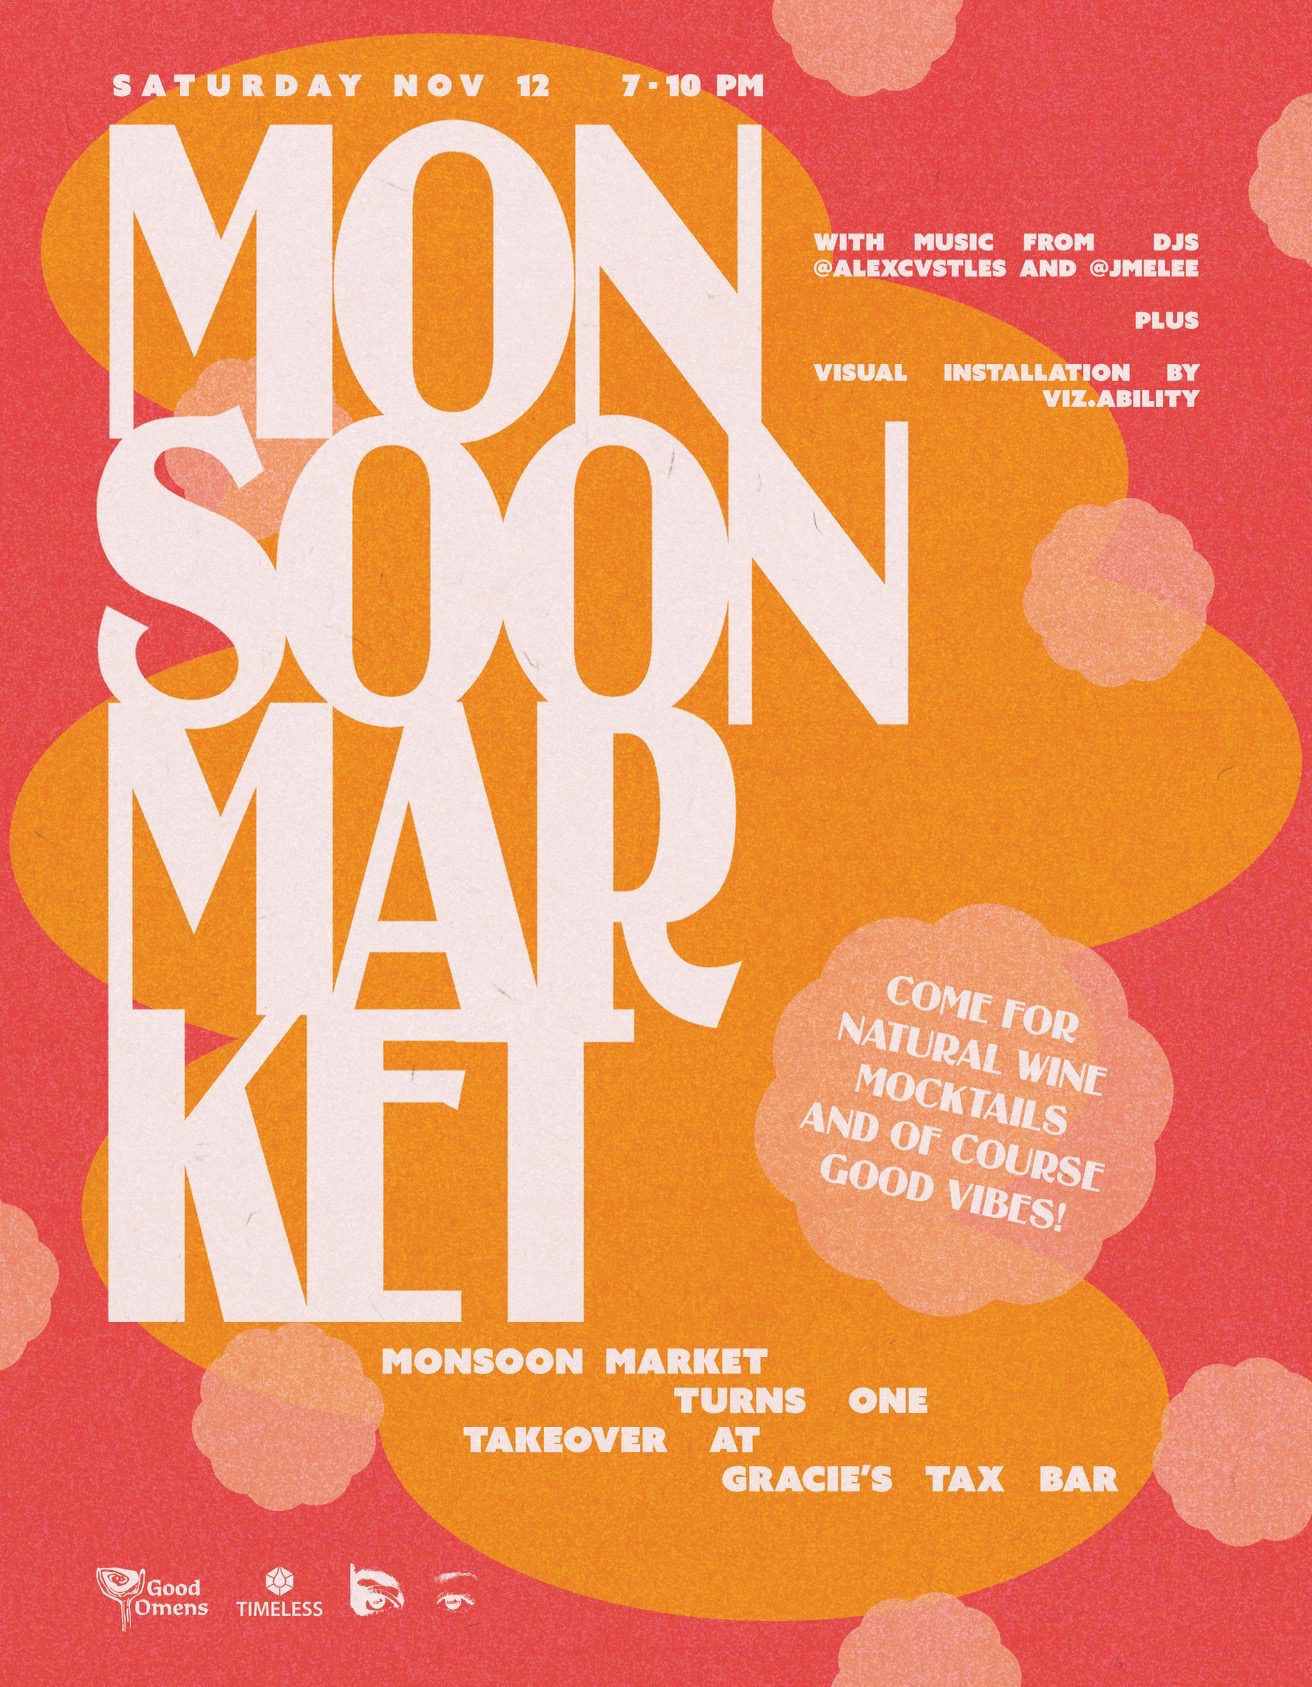 Monsoon Market Turns 1 year old, first anniversary celebration at Gracie's Tax Bar